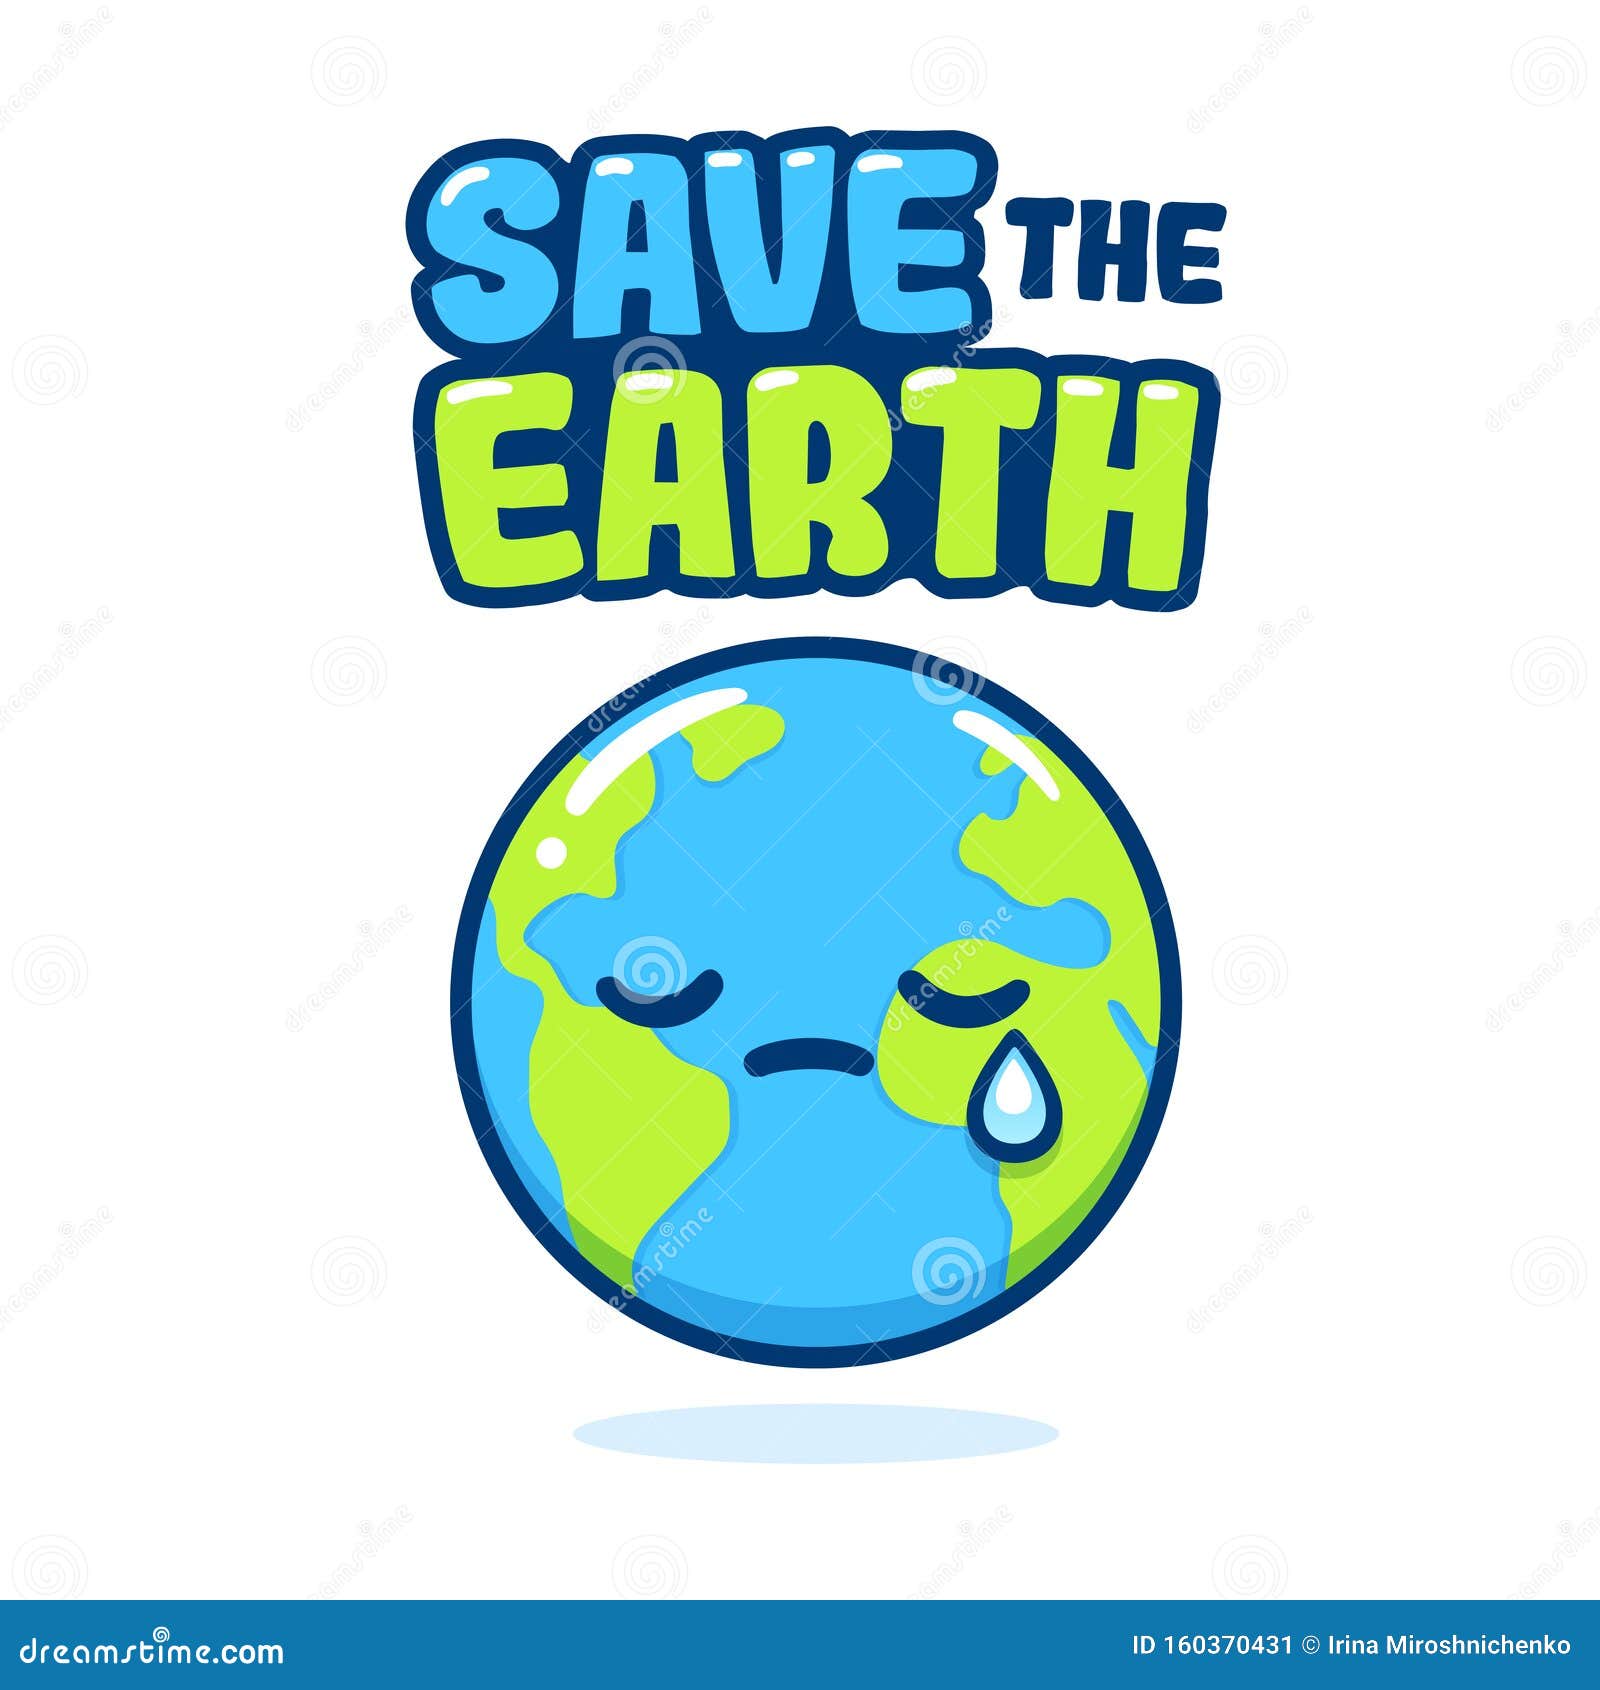 Save the Earth poster stock vector. Illustration of globe - 160370431